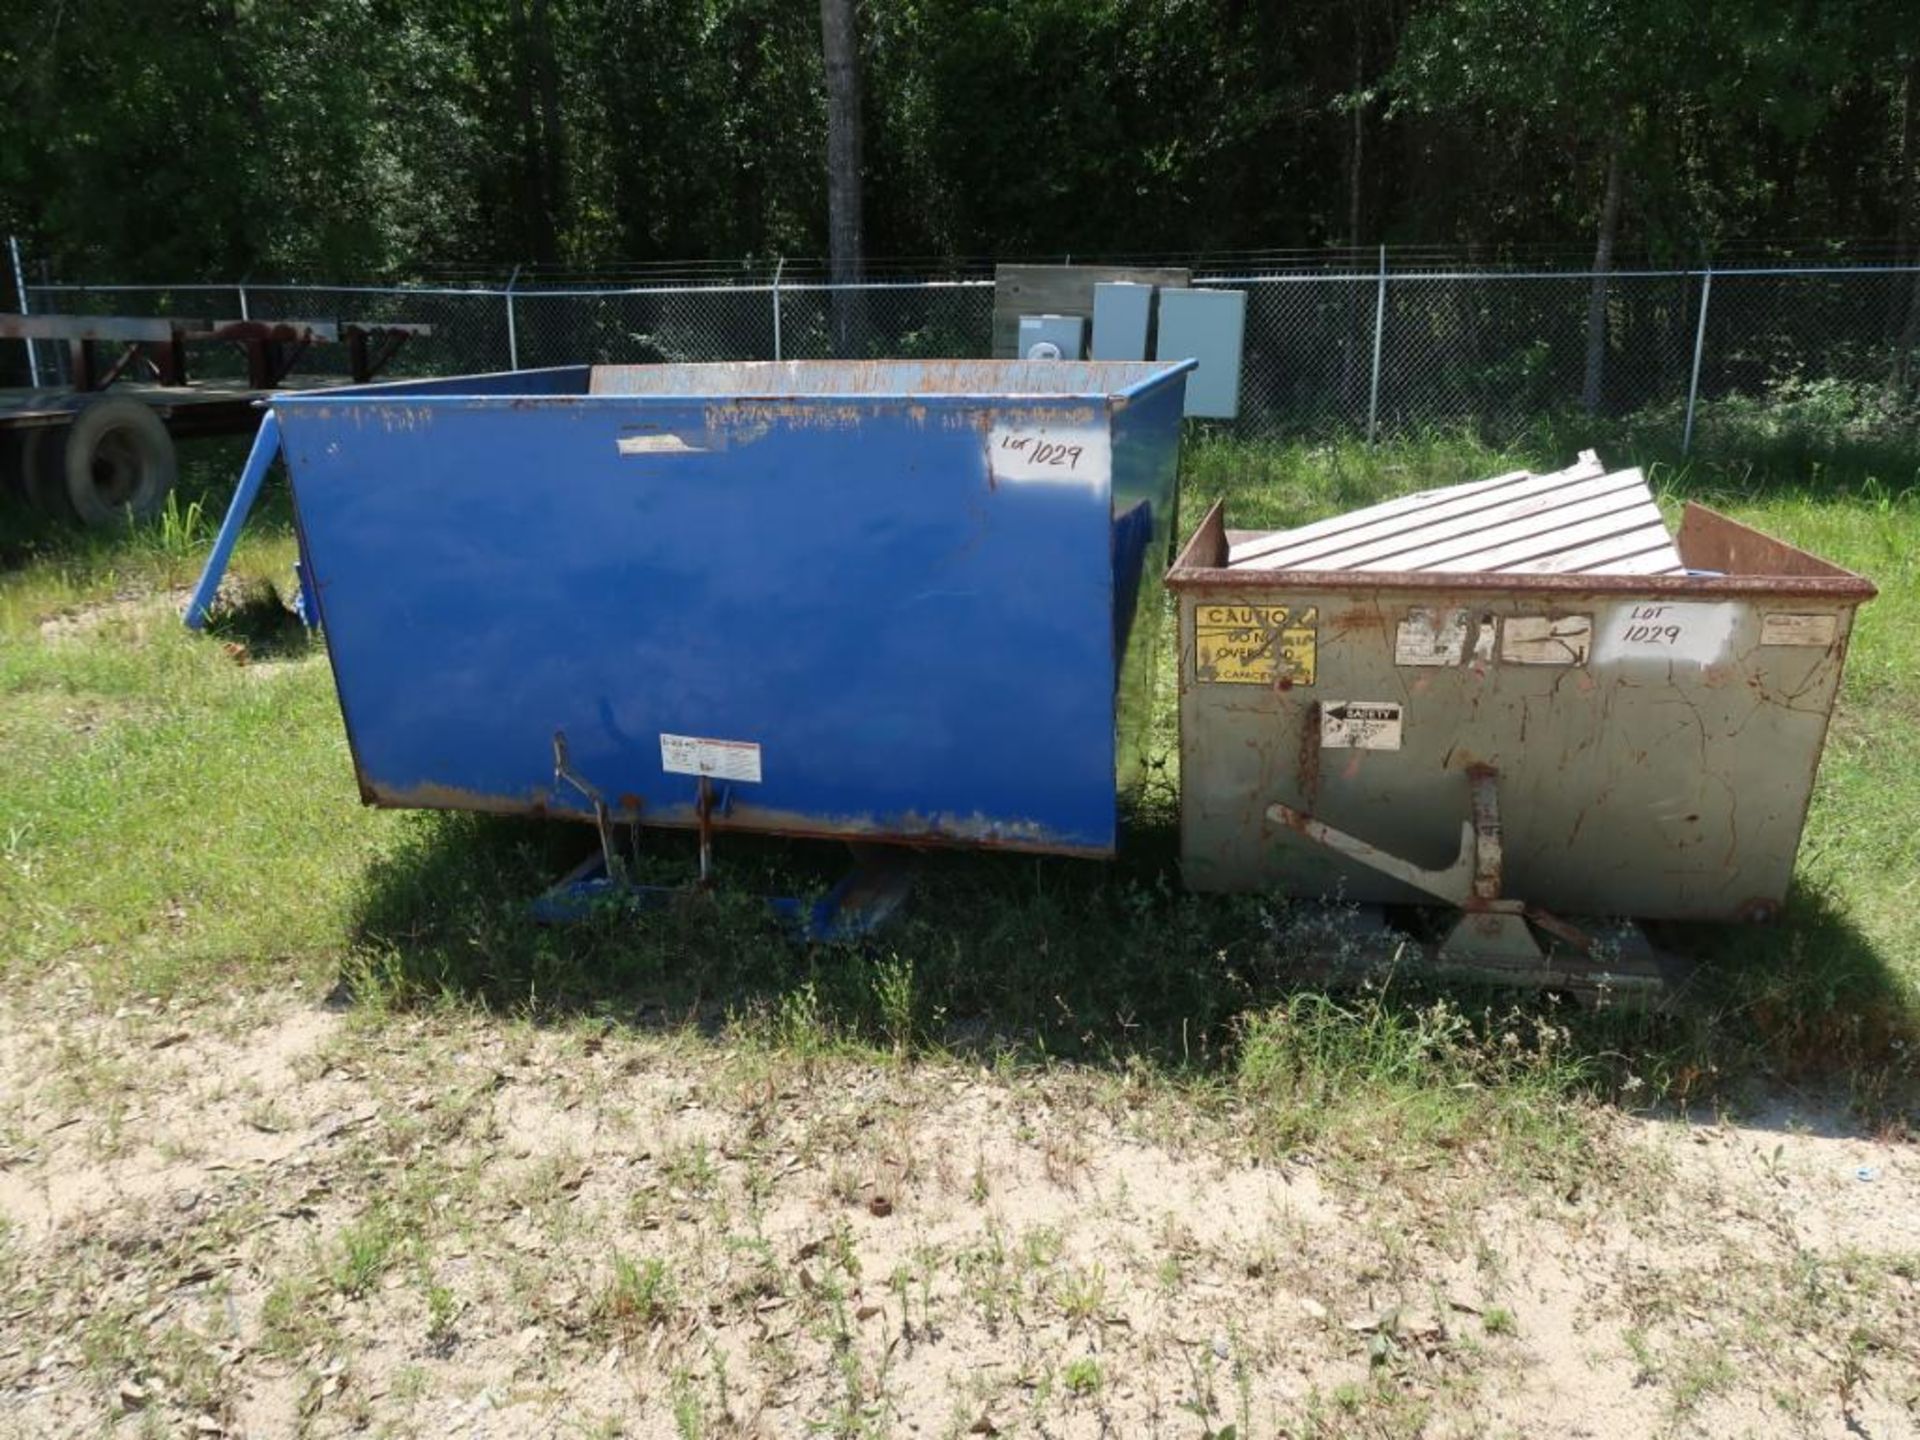 (LOT) WITH (3) ASSORTED SELF-DUMPING HOPPERS AND (1) PLASTIC TOTE W/ COVER (LOCATED IN YARD)